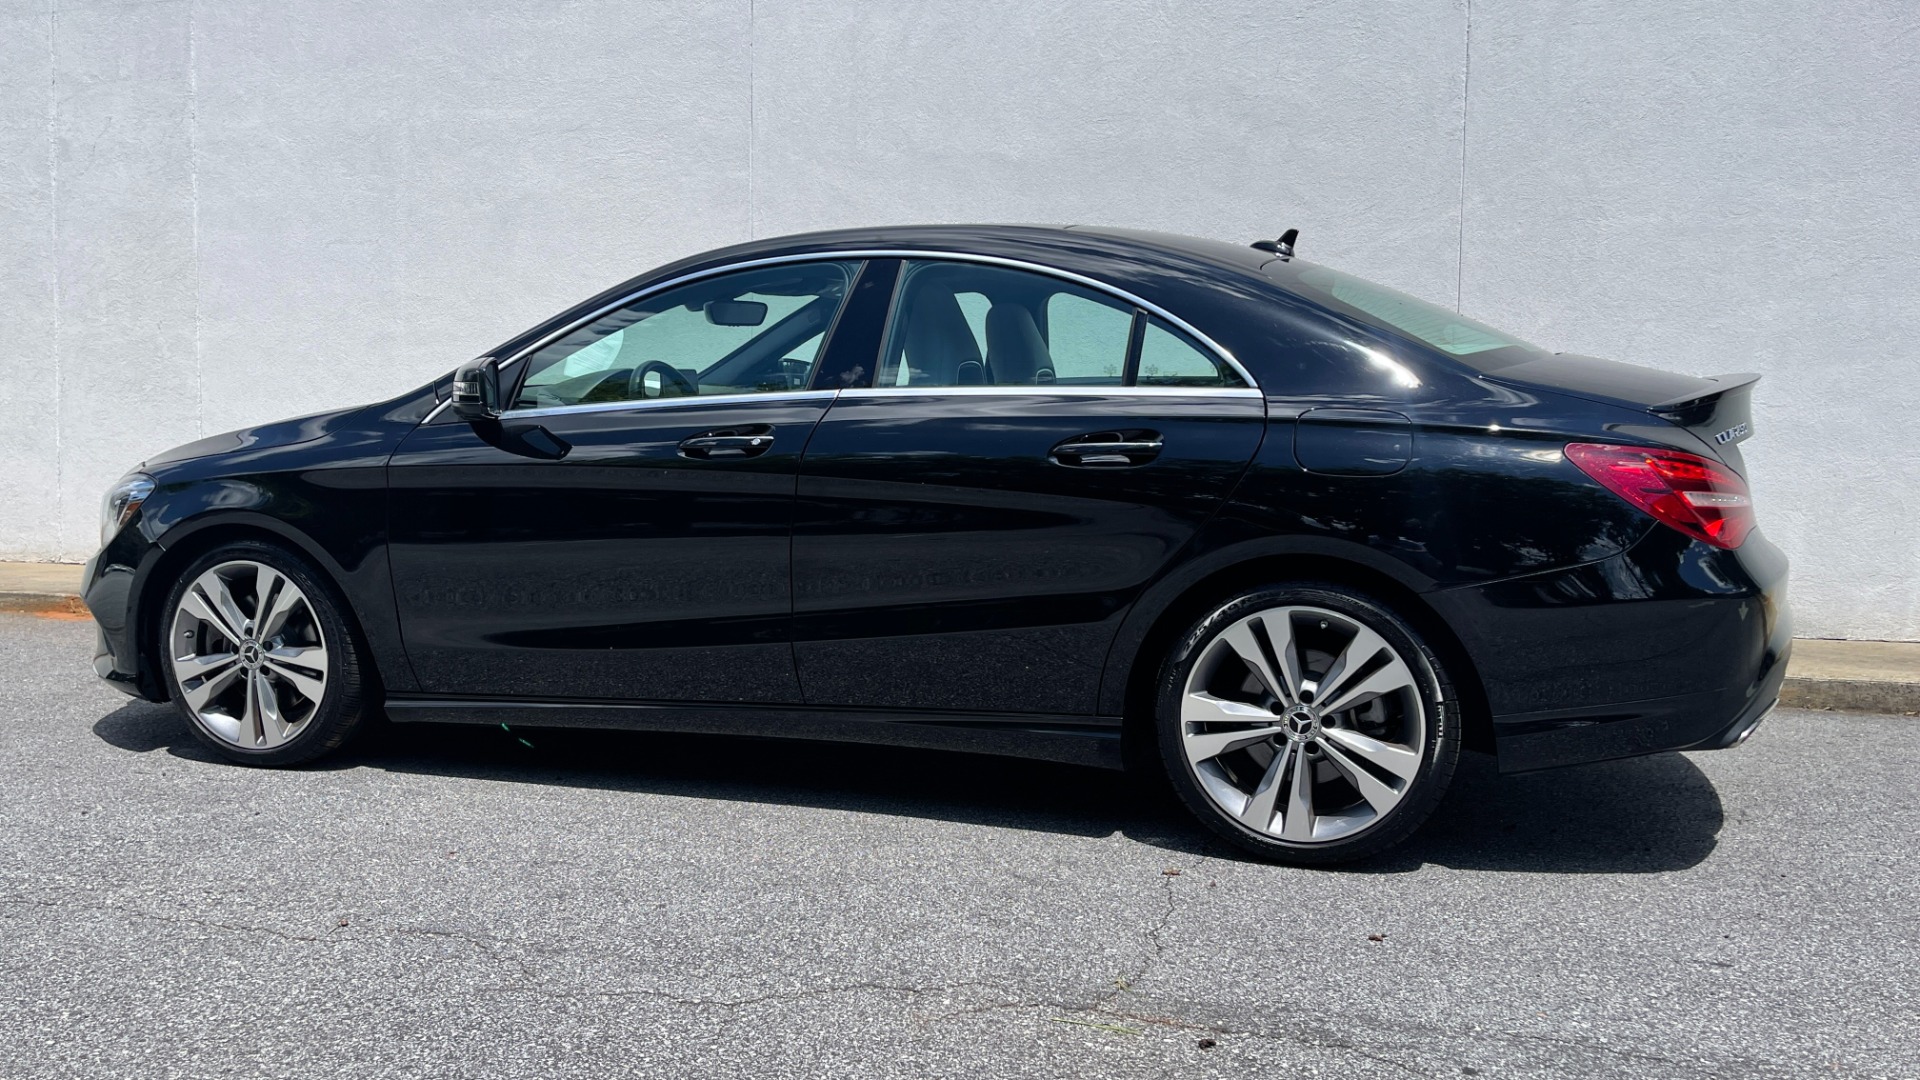 Used 2019 Mercedes-Benz CLA CLA 250 / PANORAMIC ROOF / PREMIUM / CONVENIENCE / HARMAN KARDON SOUND for sale $32,595 at Formula Imports in Charlotte NC 28227 5